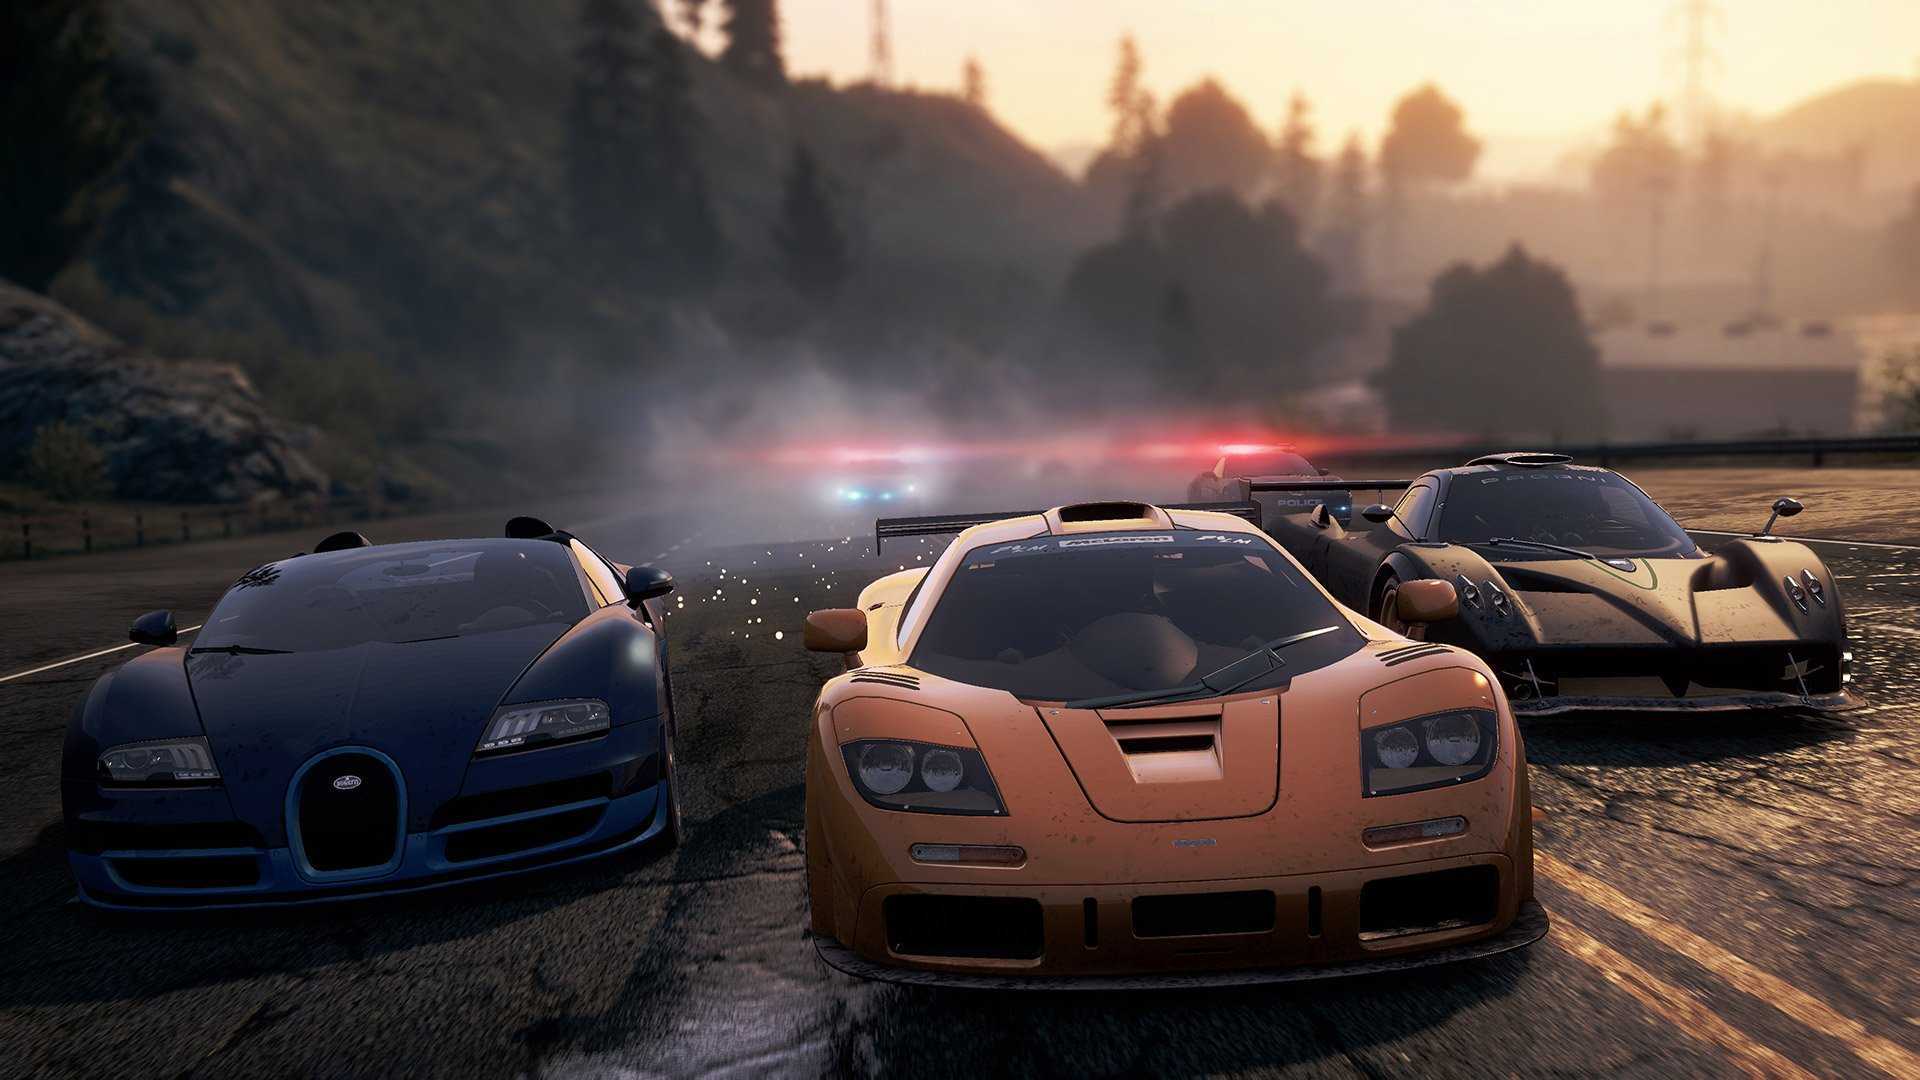 Need for Speed 2022. NFS most wanted. Need for Speed most wanted 2012. Нфс 2022 геймплей. Игры машины нфс